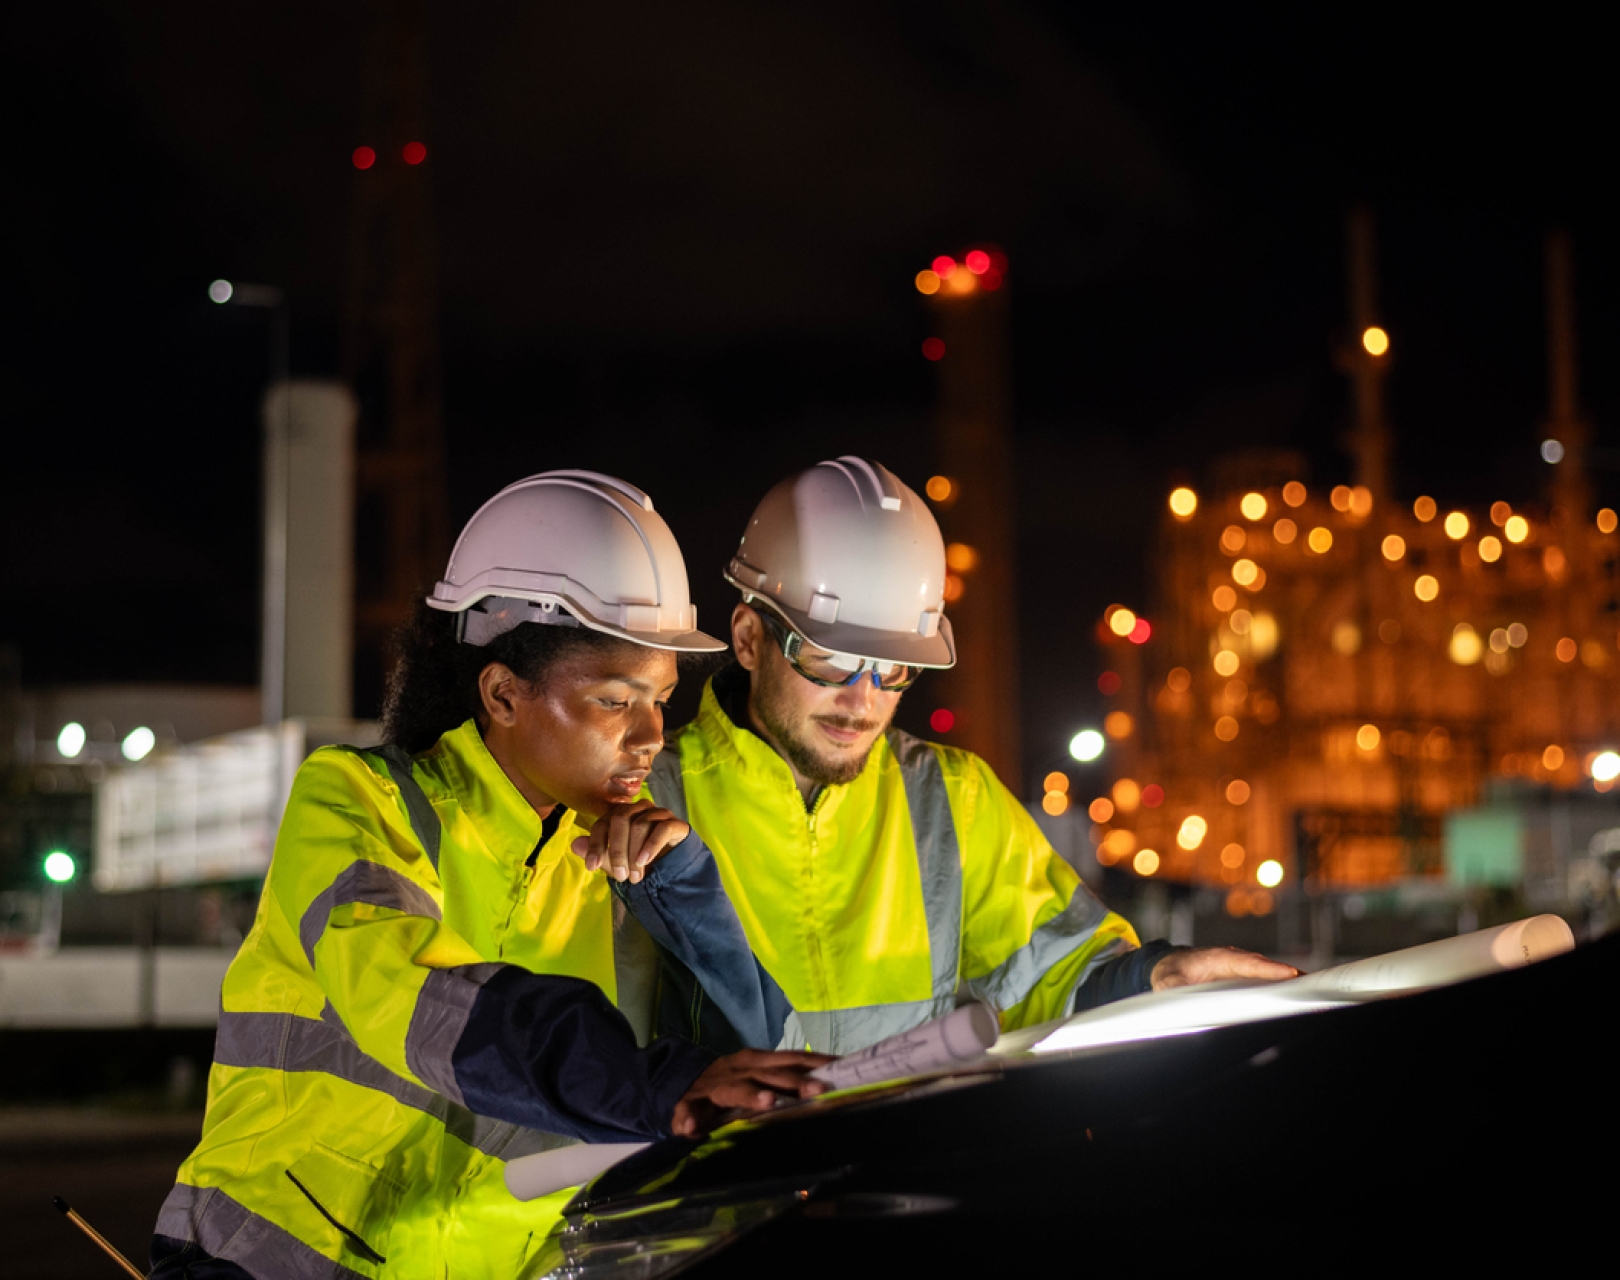 A Black woman and white man, both wearing hi-vis yellow clothing and white hard hat, look at drawings unrolled across a car bonnet. It is night and a building, under construction, is illuminated in the background